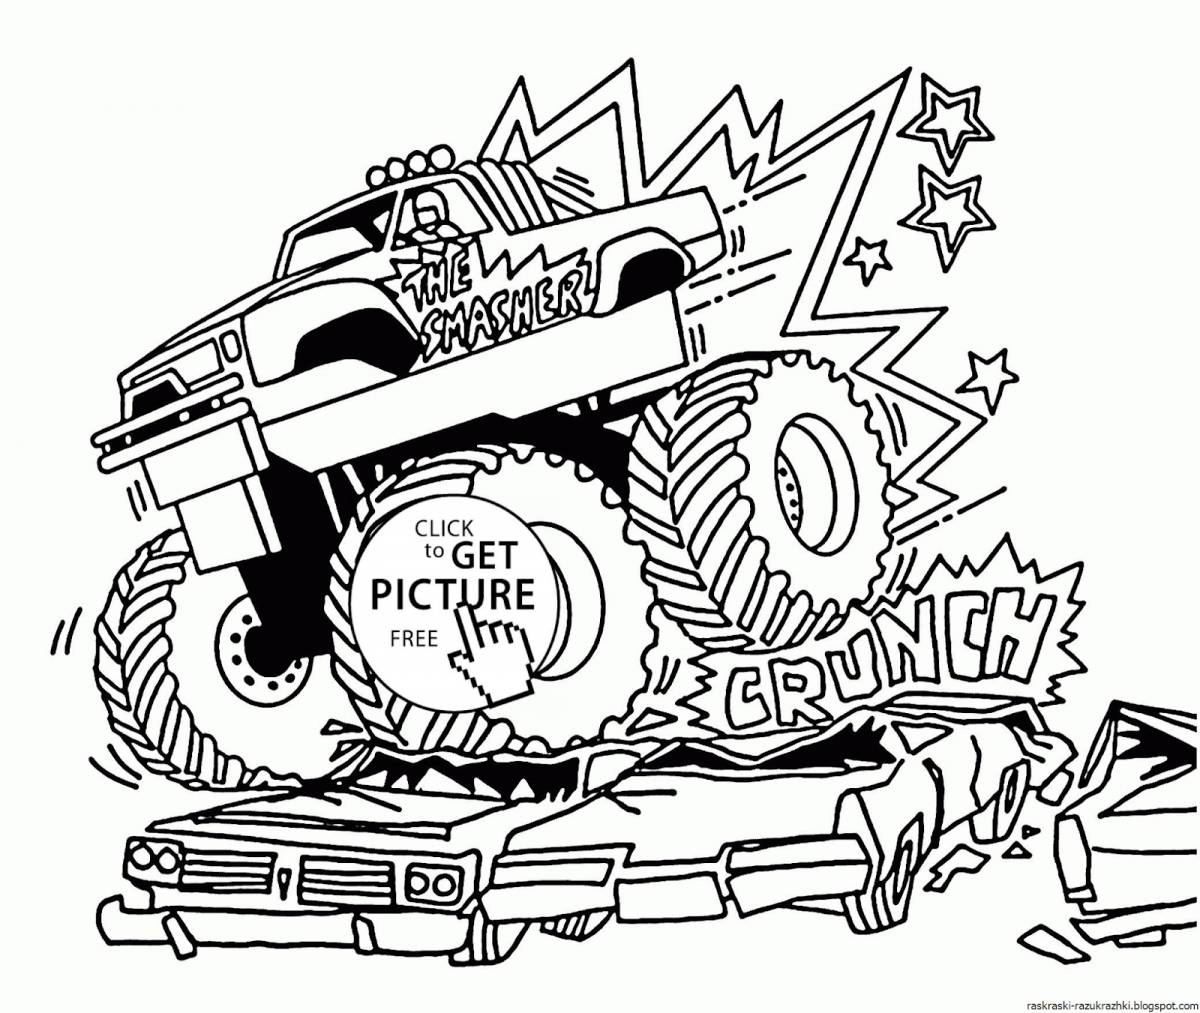 Monstrously generous monster truck coloring book